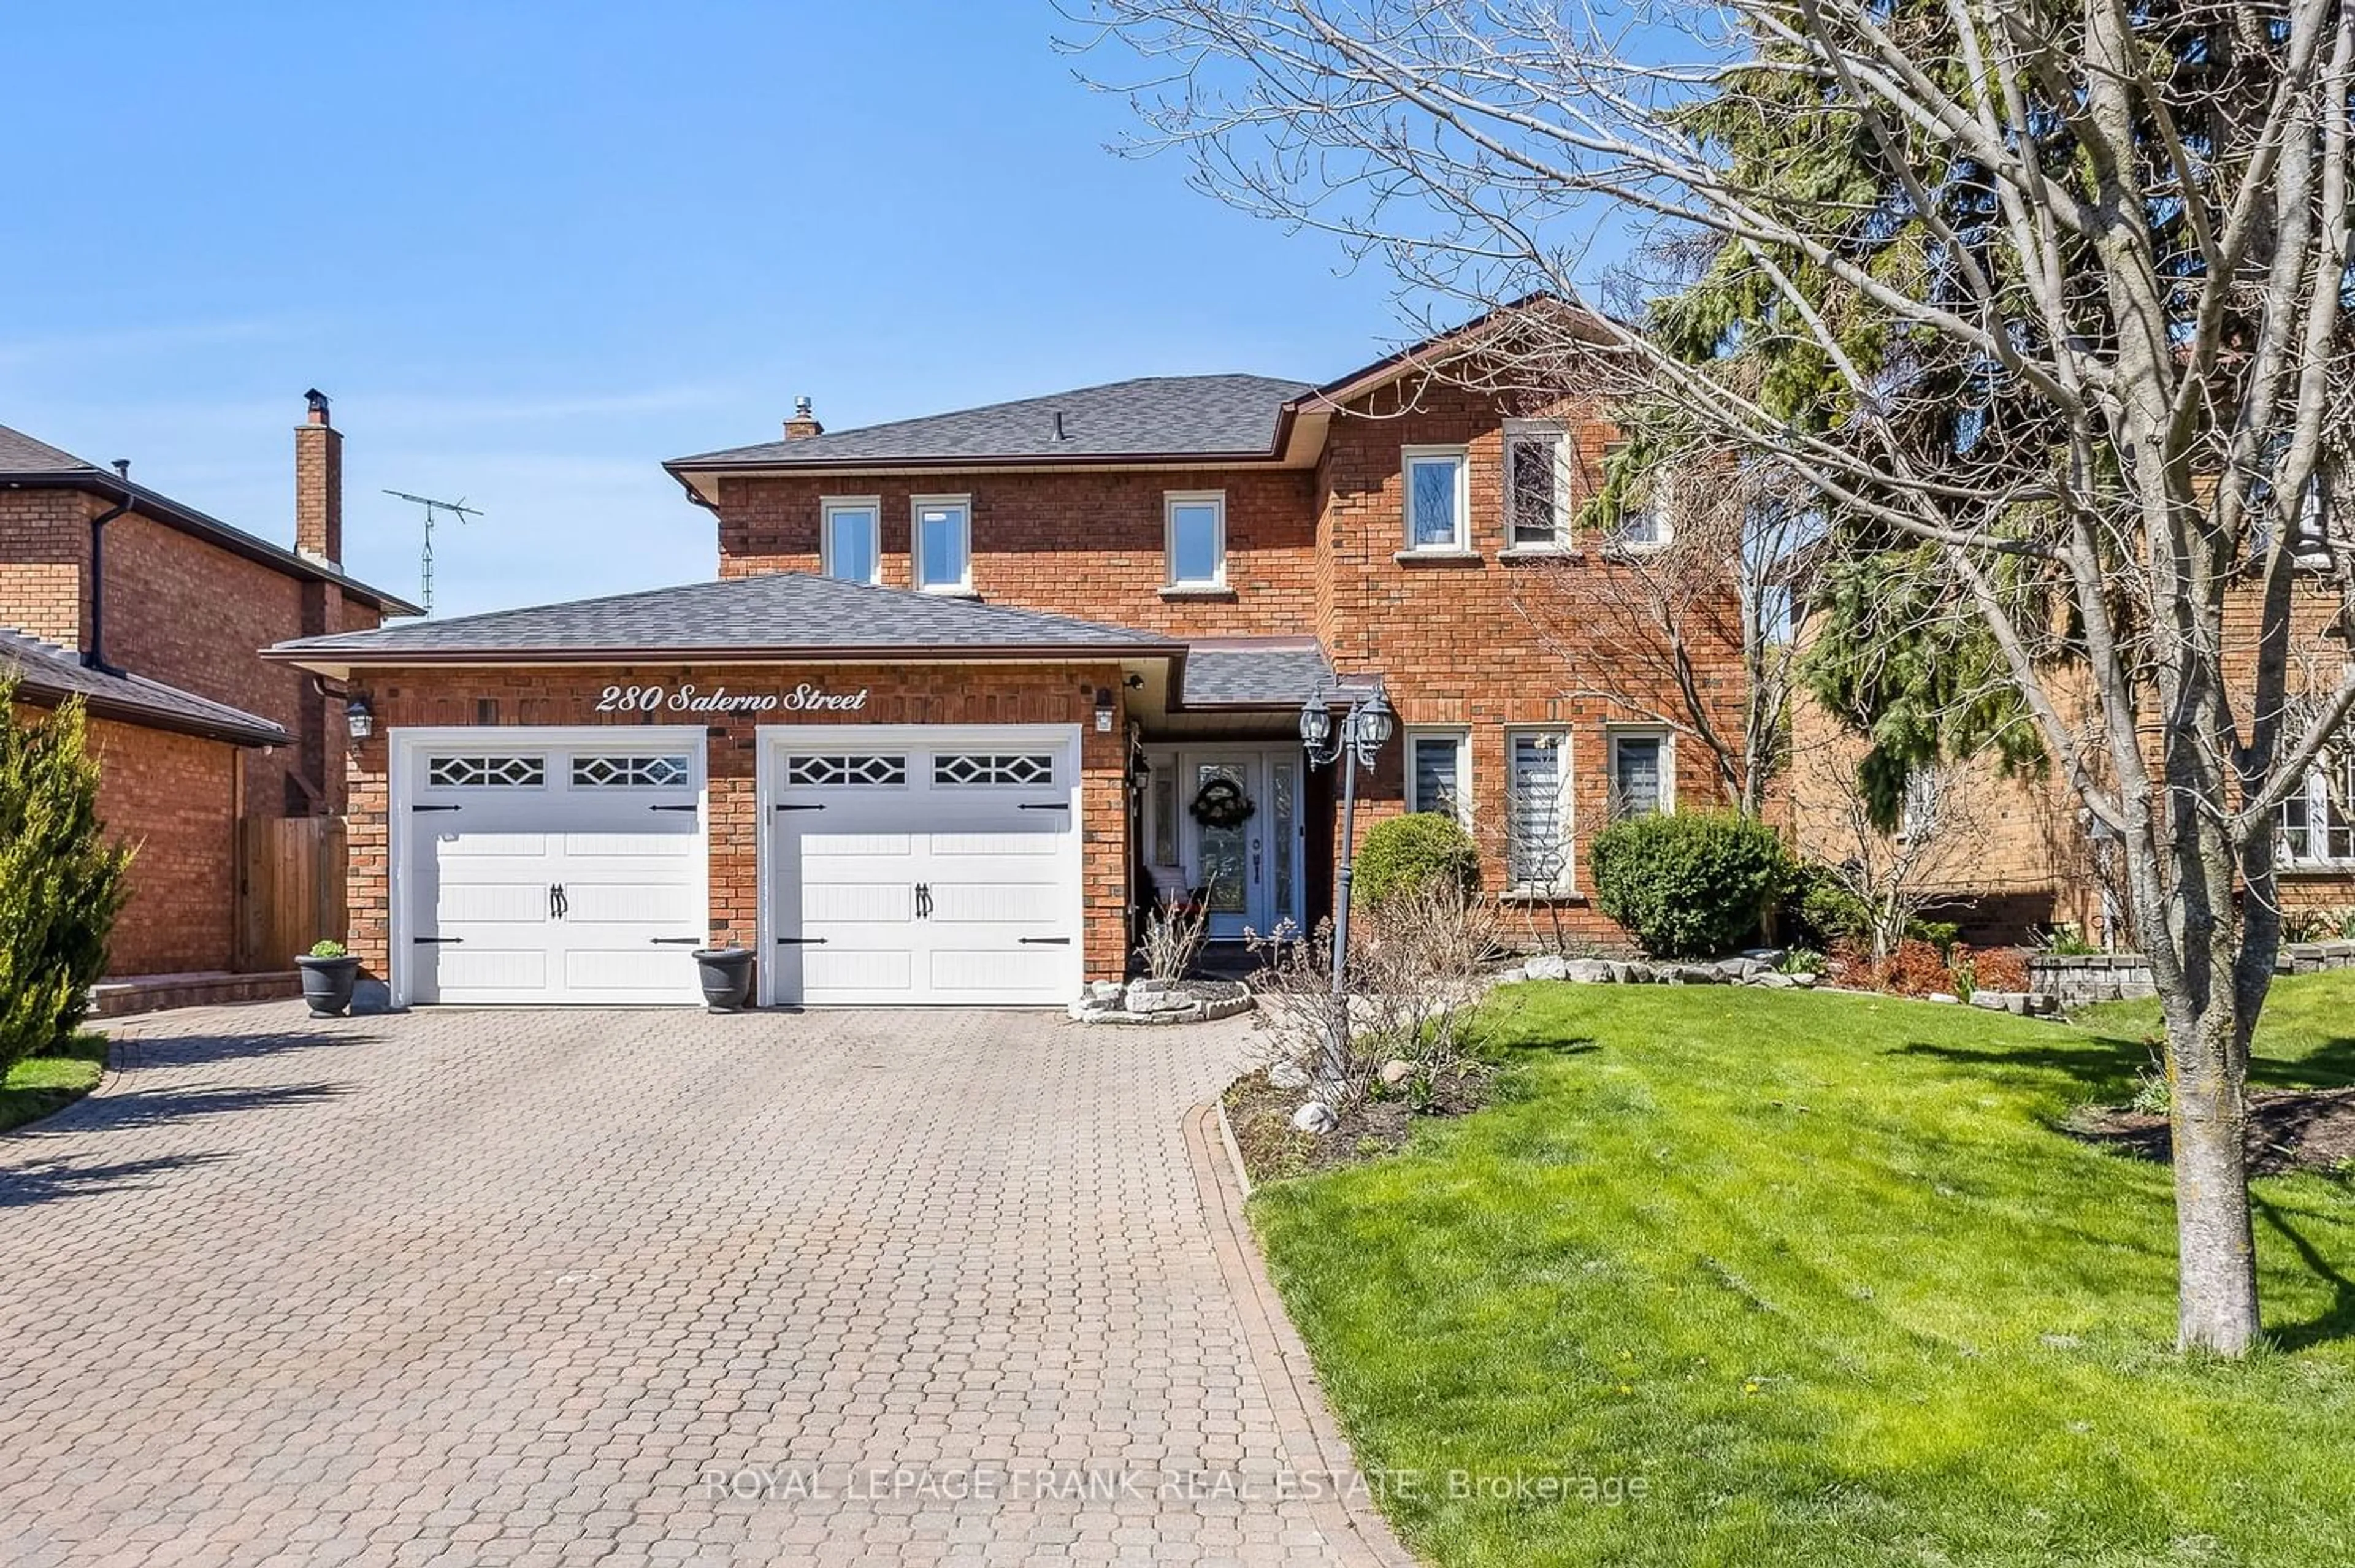 Home with brick exterior material for 280 Salerno St, Oshawa Ontario L1J 6W2